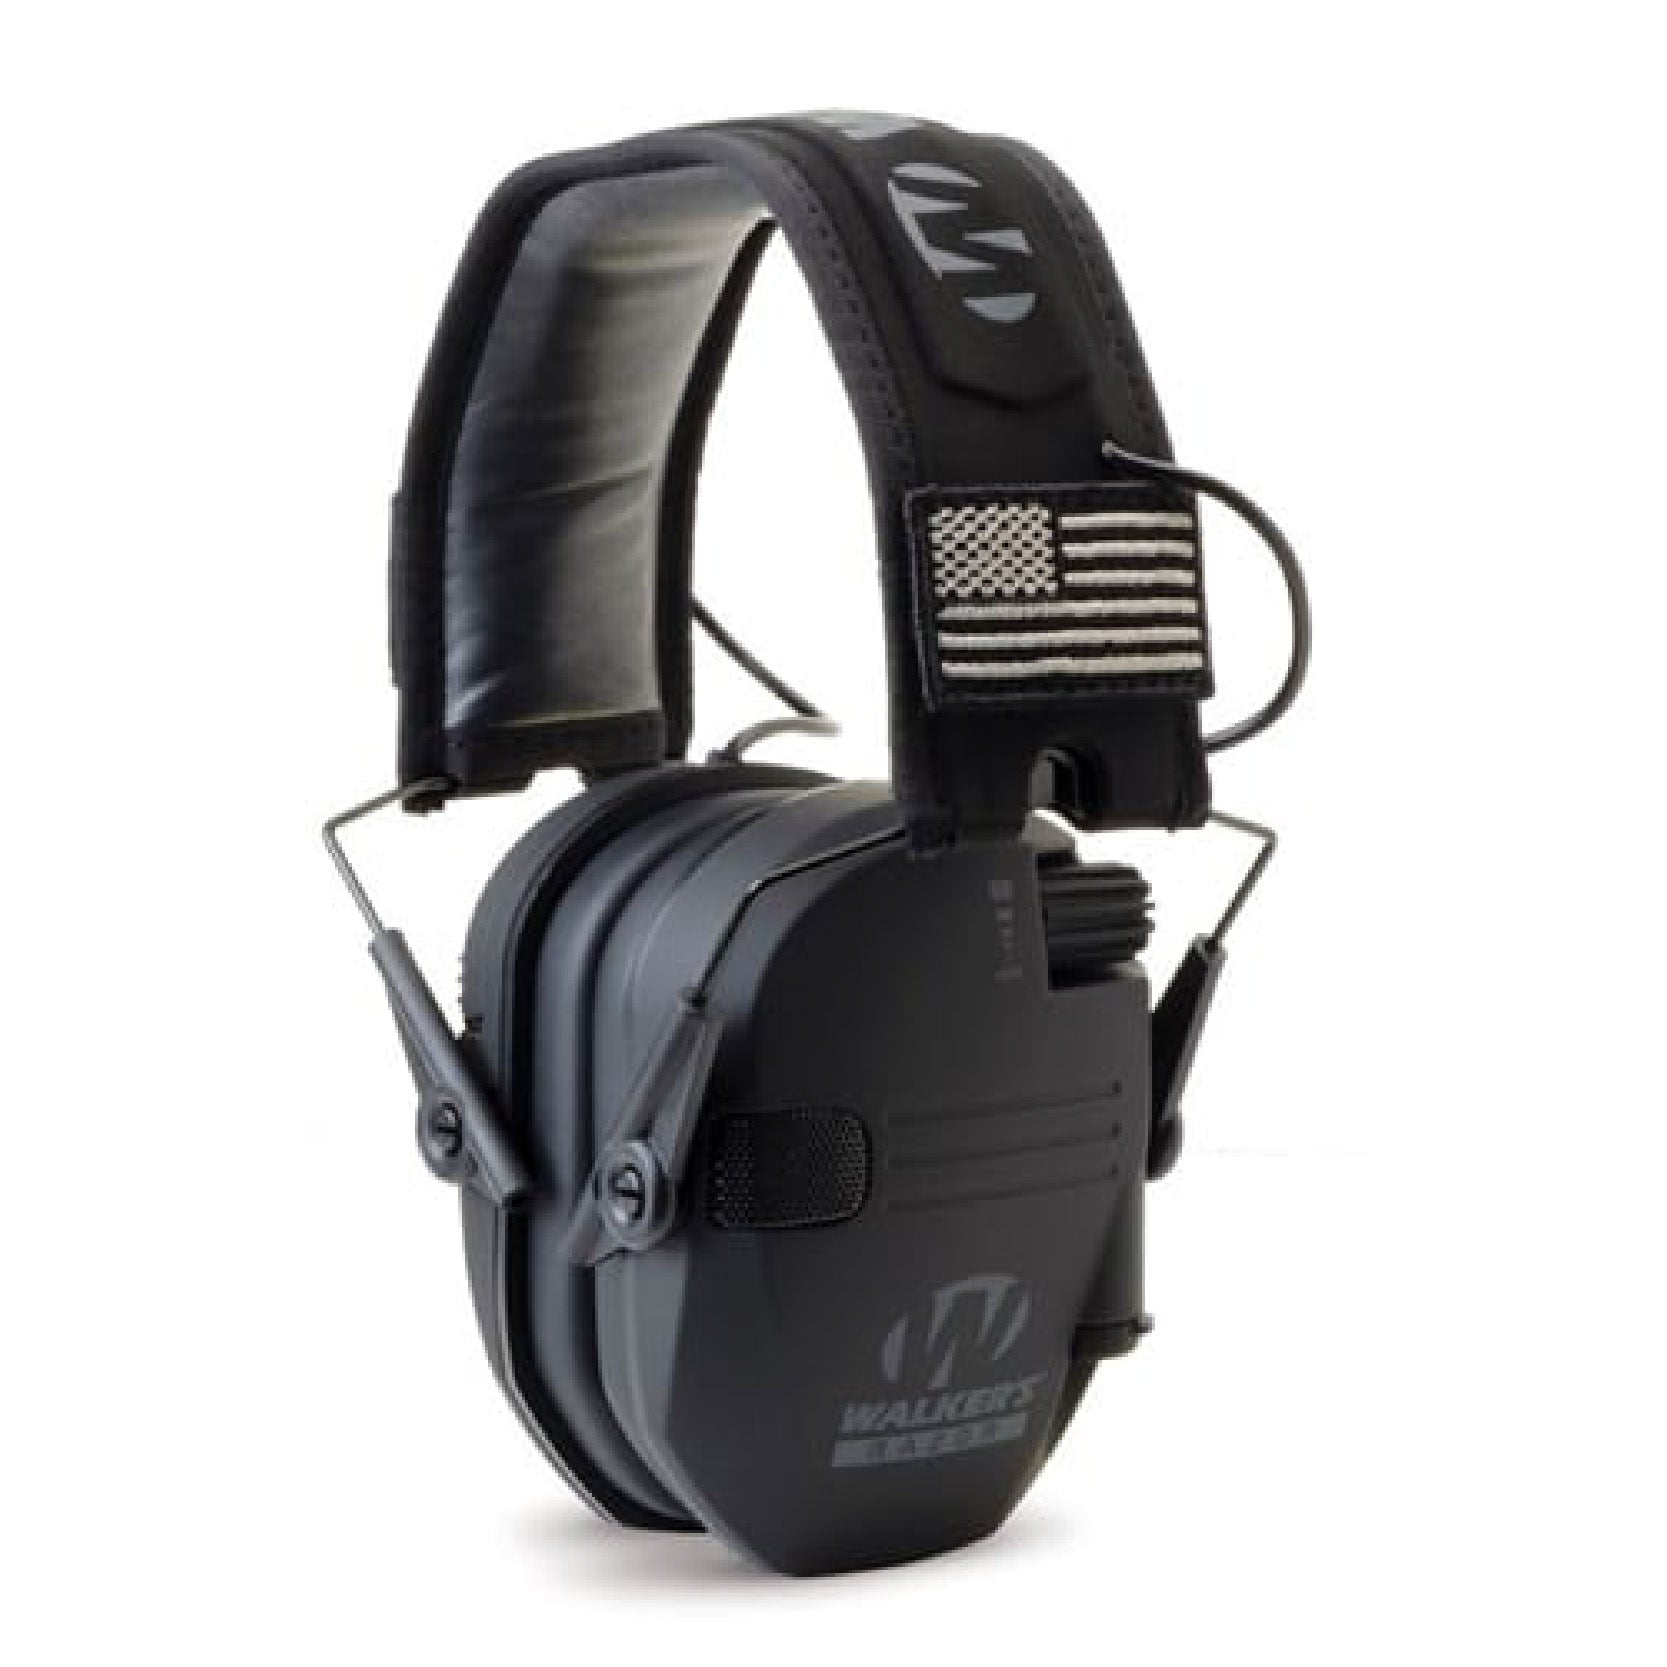 Walker's Razor Patriot Series Electronic Muffs W/Patches